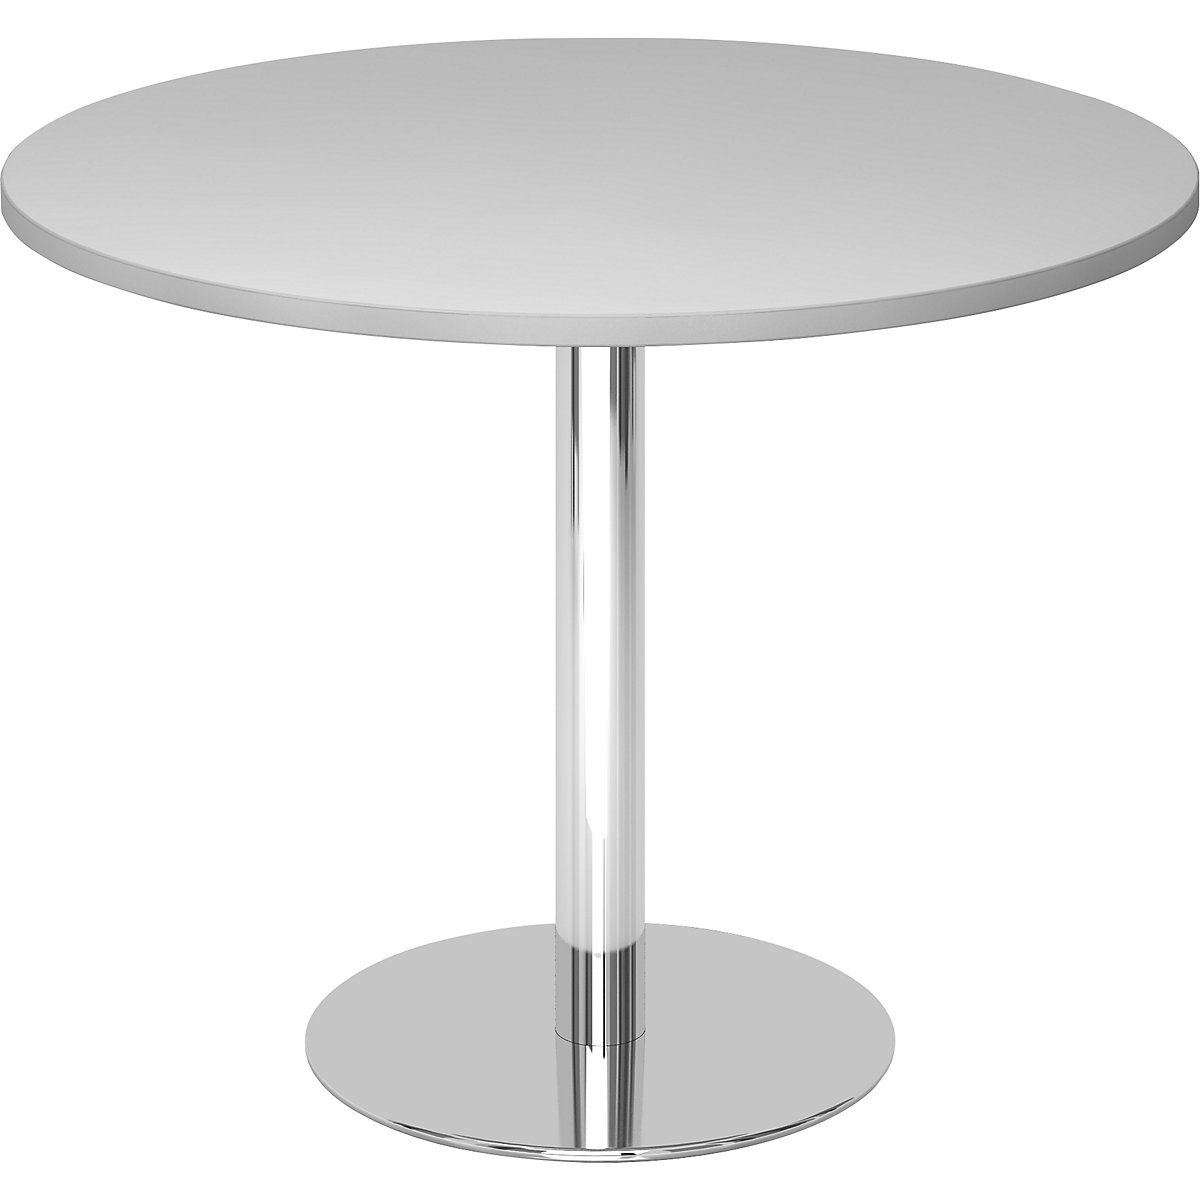 Conference table, Ø 1000 mm, 755 mm high, chrome plated frame, tabletop in light grey-6